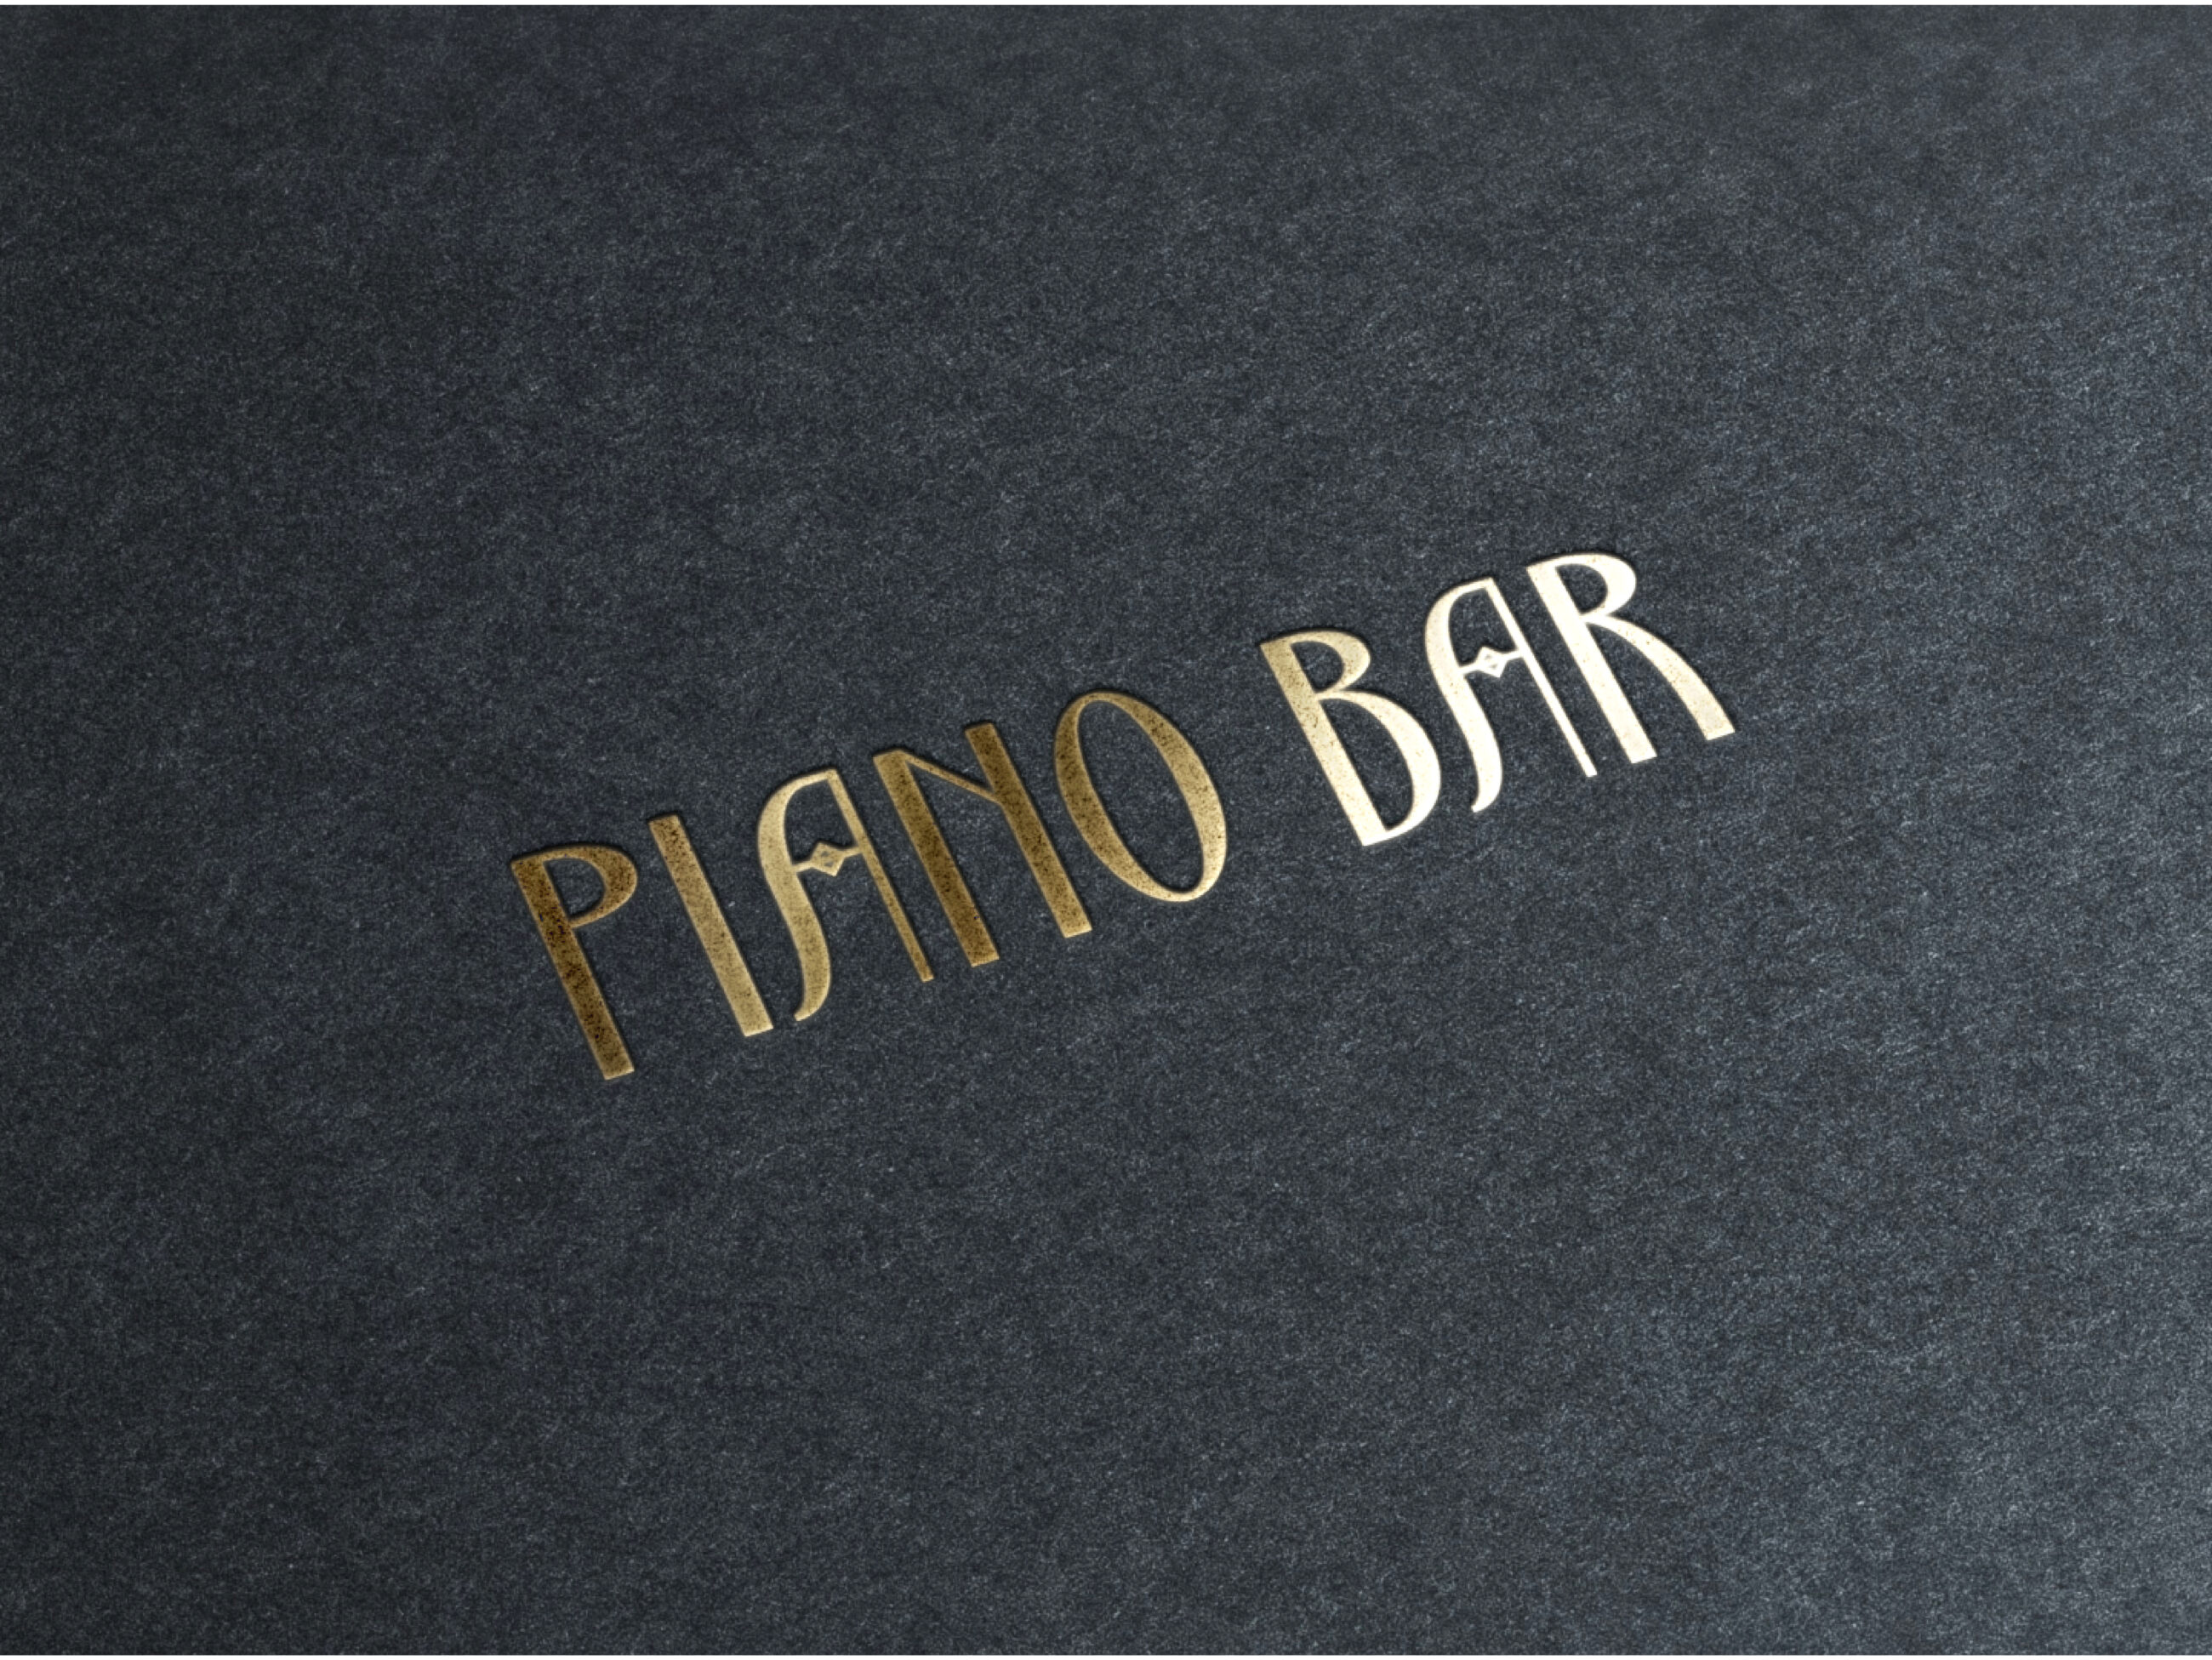 Piano Bar in gold letters on suede background